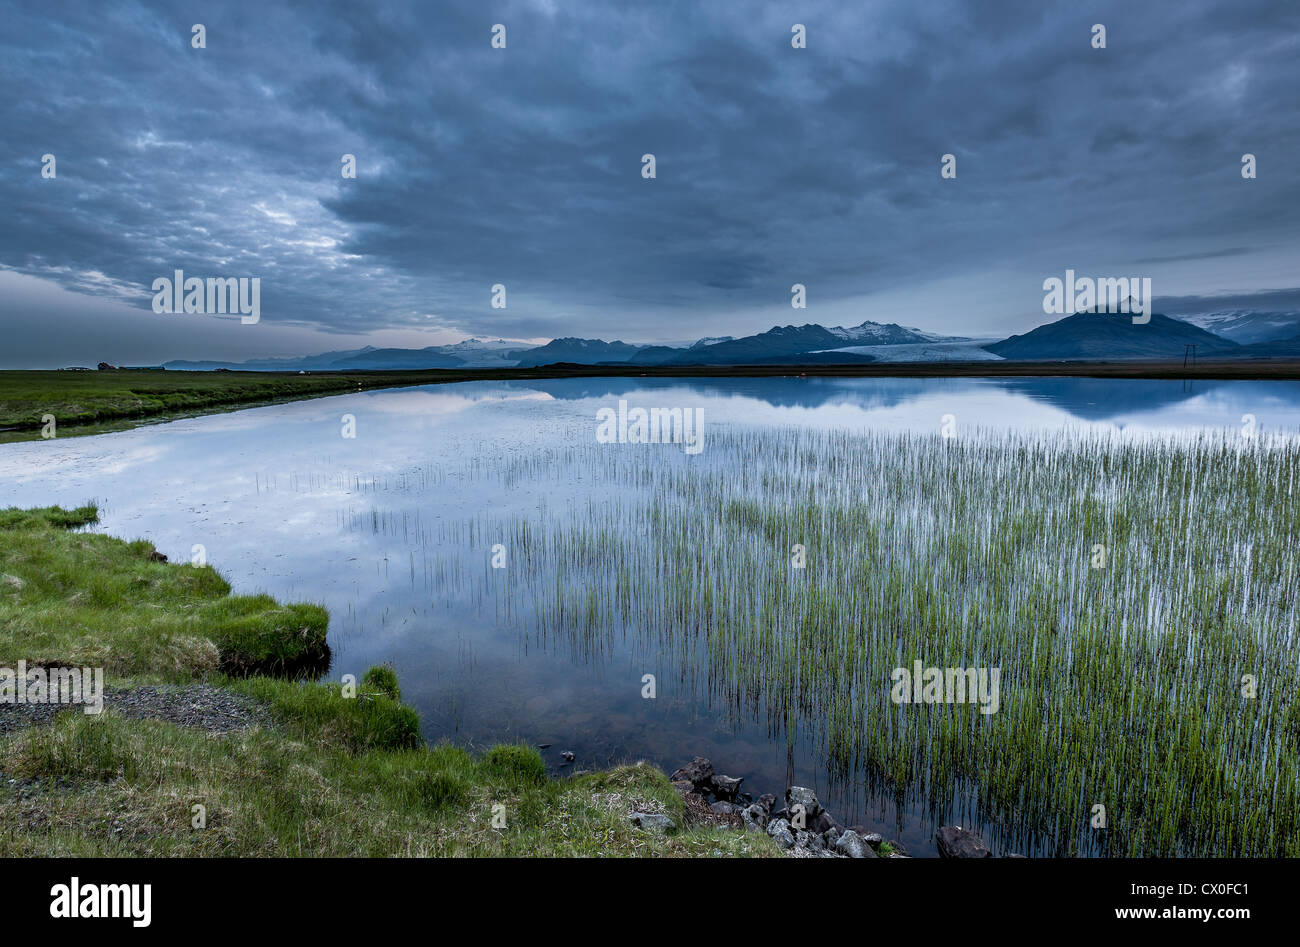 Pond with Common Spike-rush (Eleocharis palustris) Glacial tongues in the background, Vatnajokull Ice Cap, Iceland Stock Photo